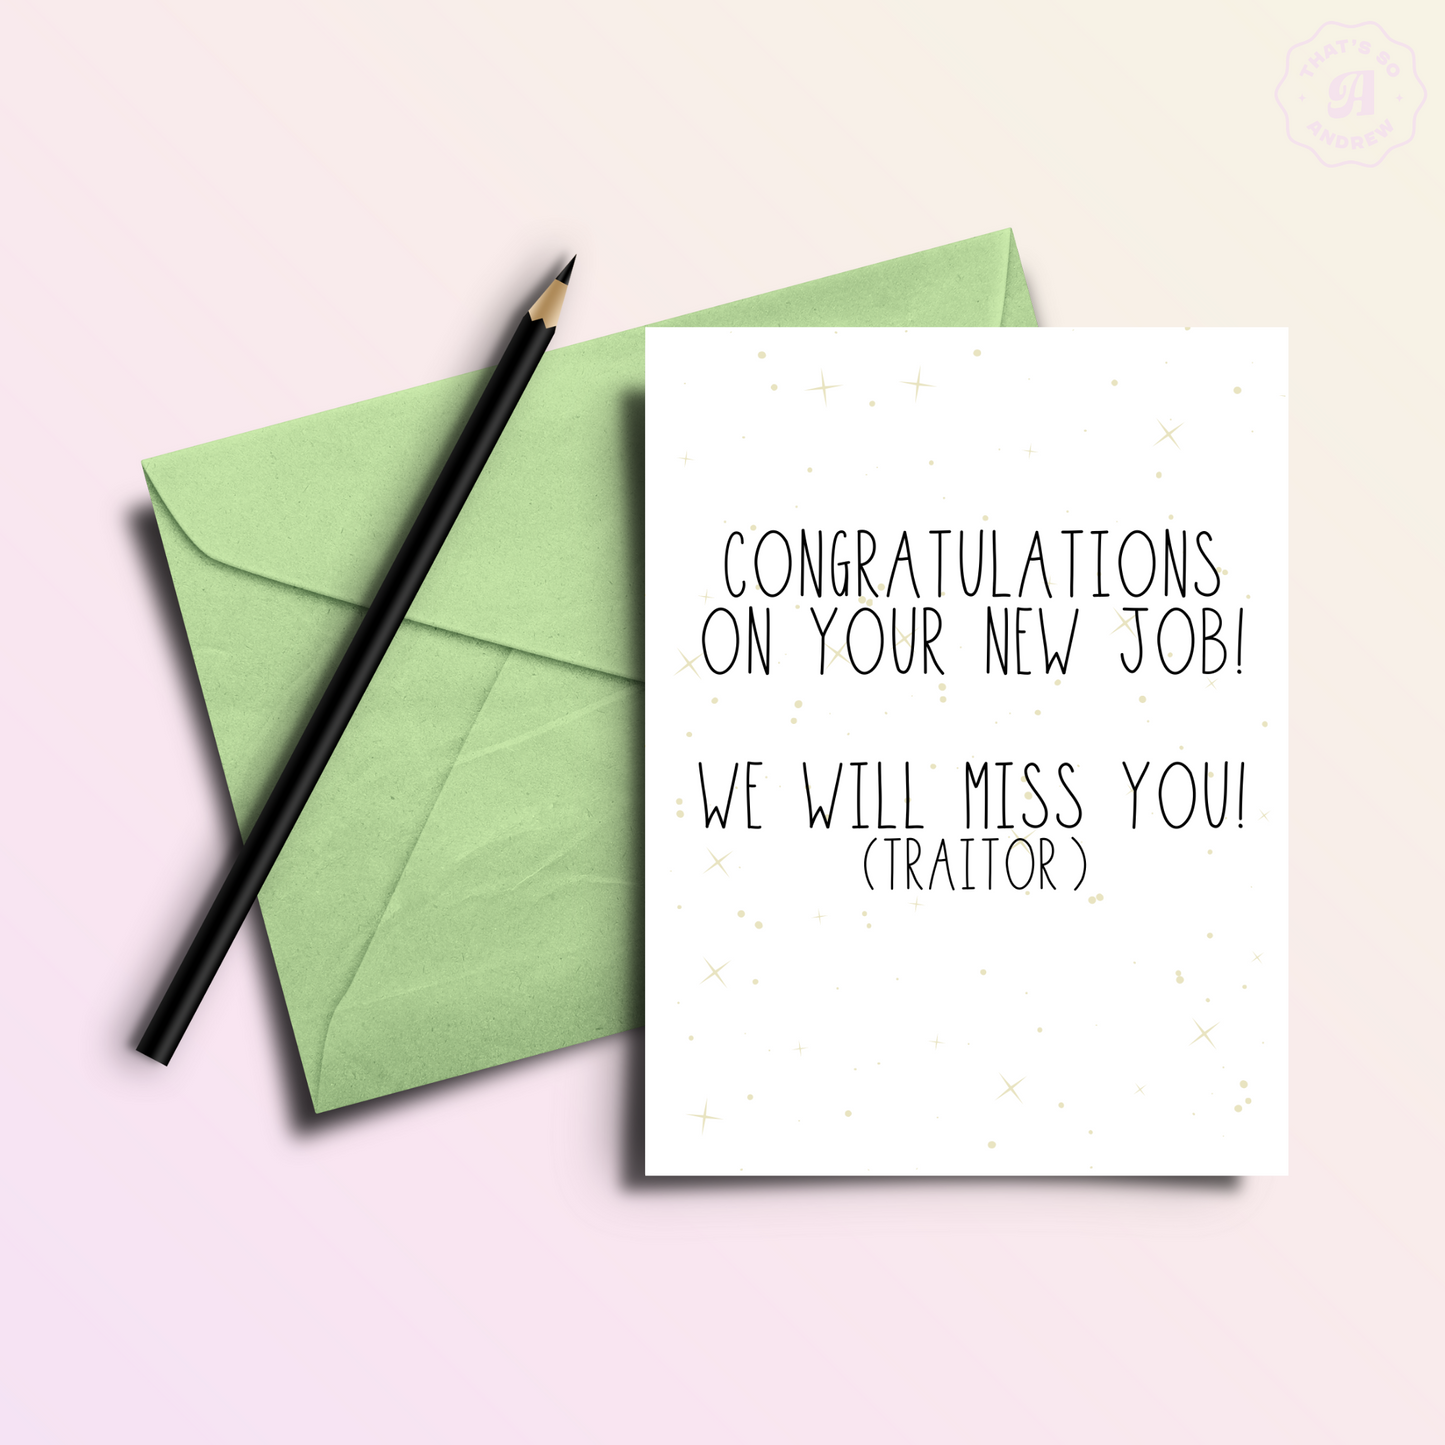 Congrats on the New Job Traitor | Funny Card